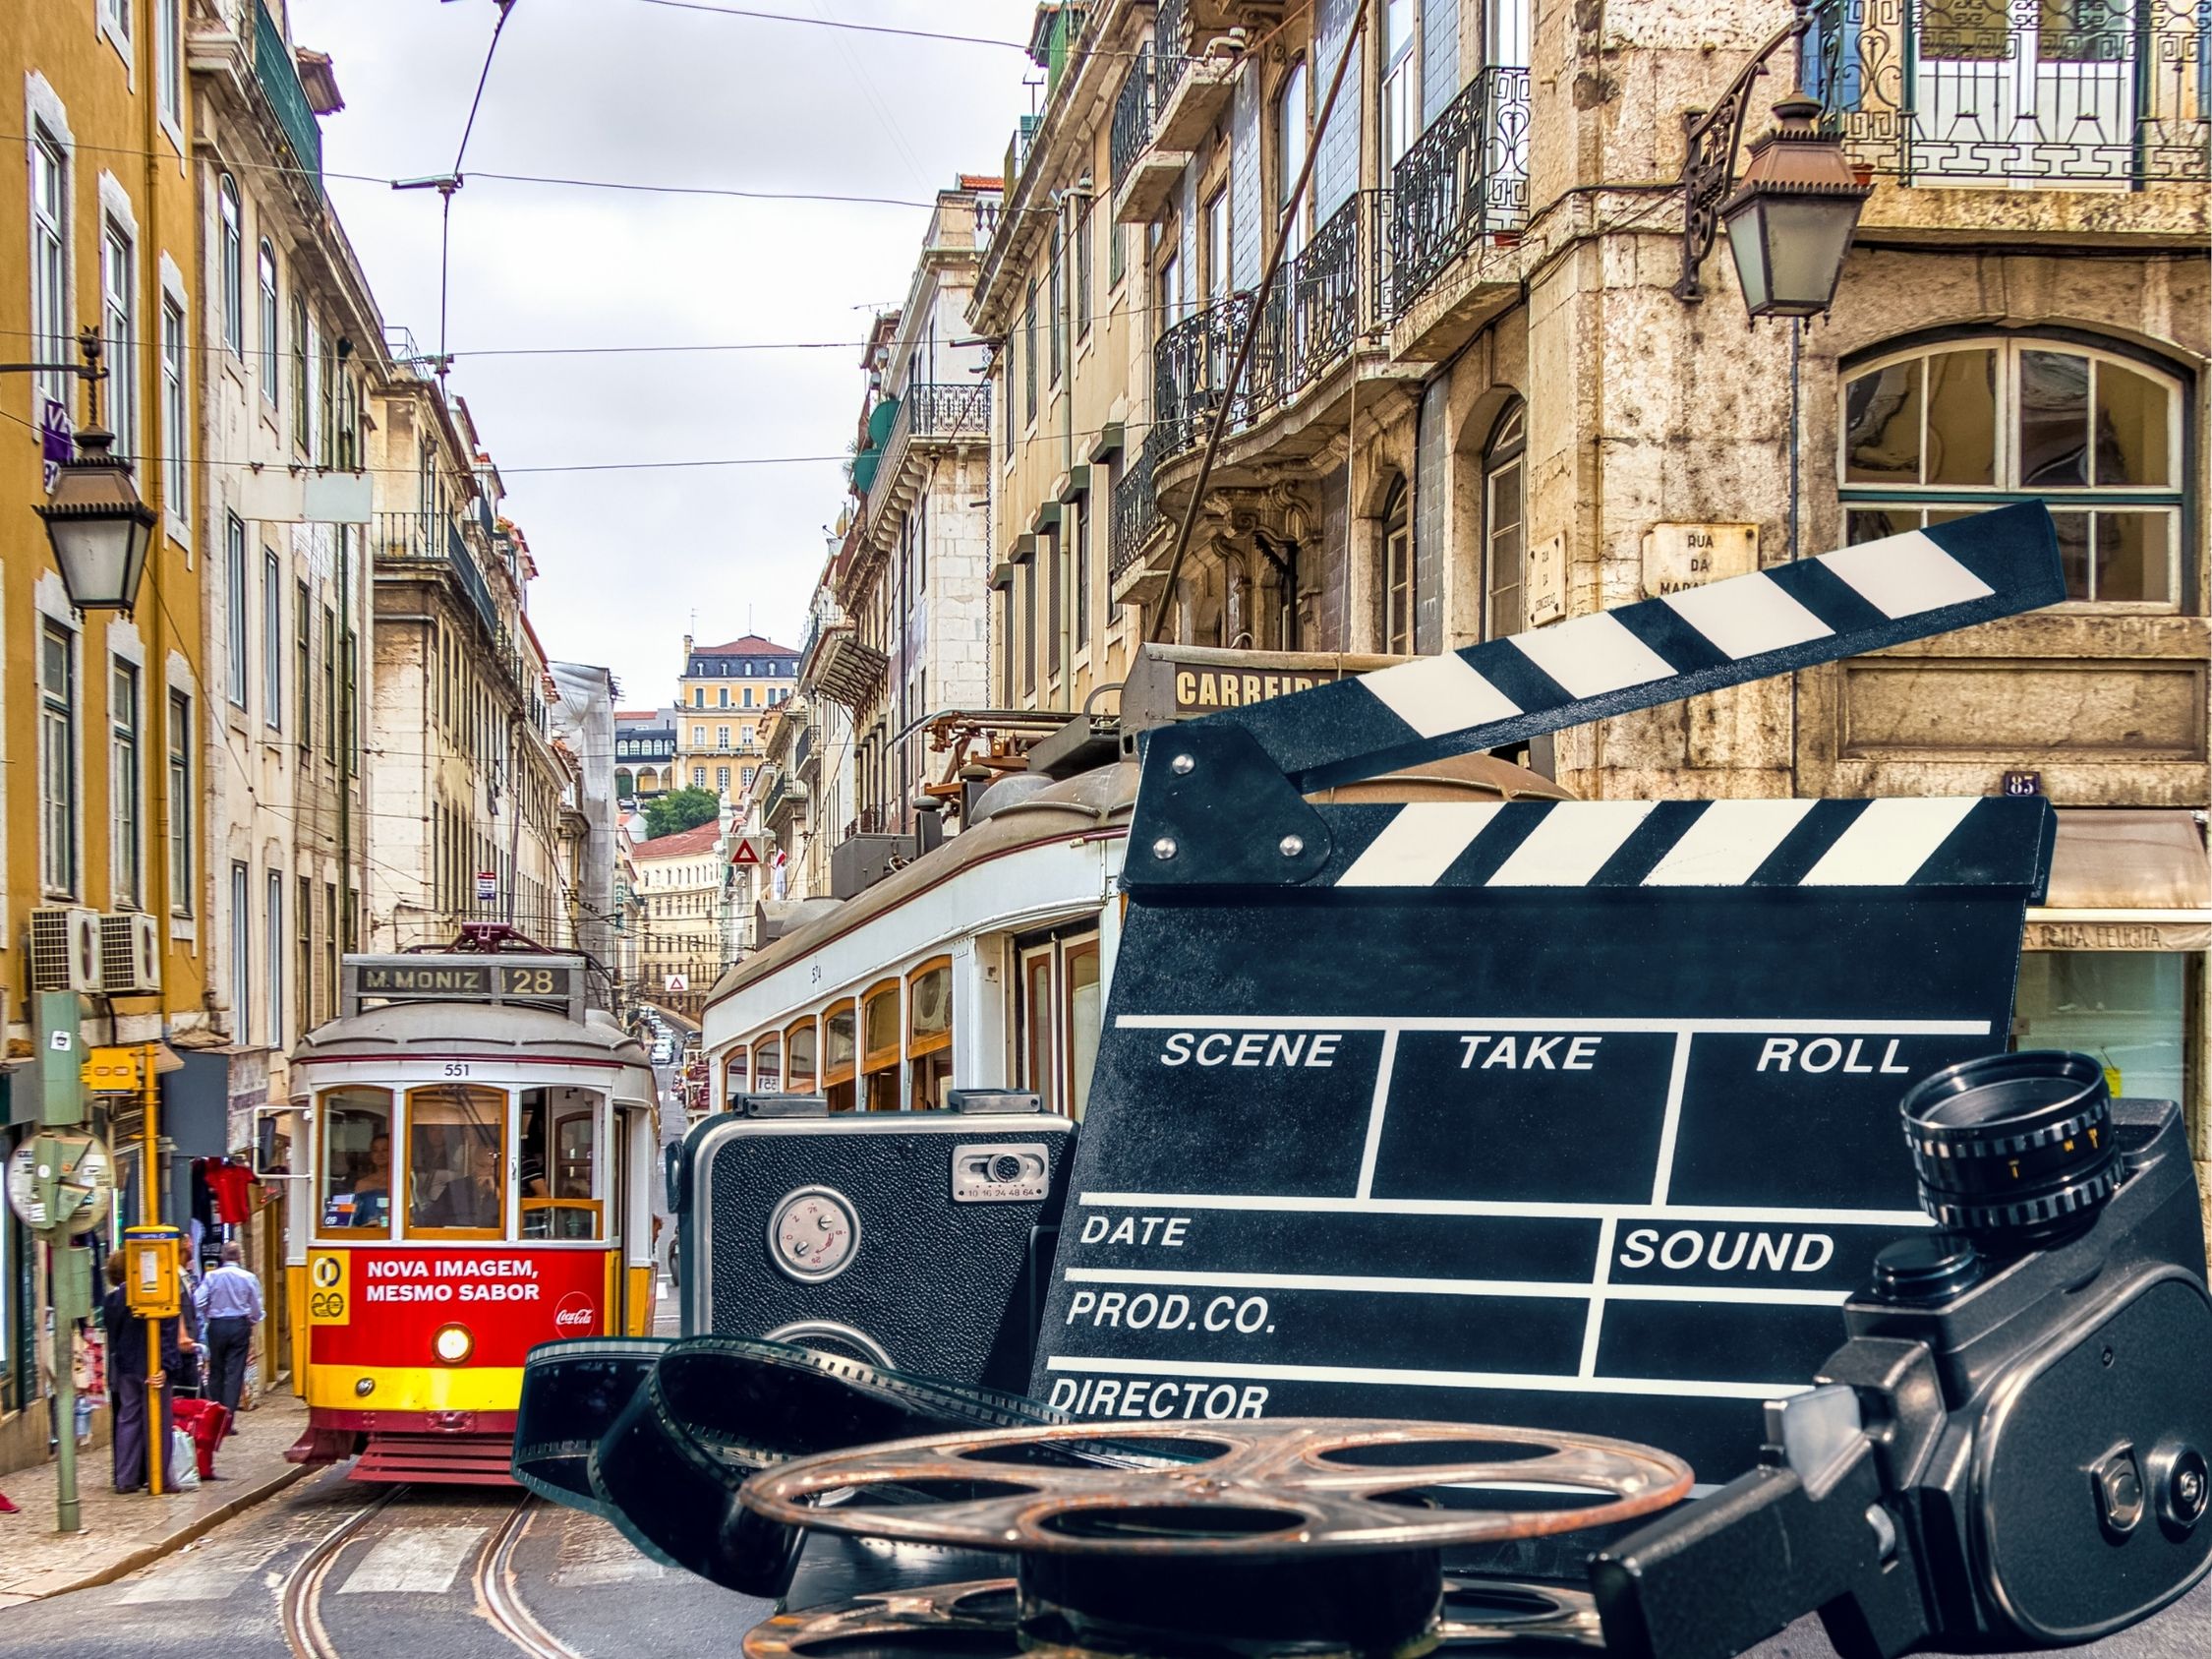 10 Extraordinary Movies Set In Portugal That Will Inspire You To Visit!